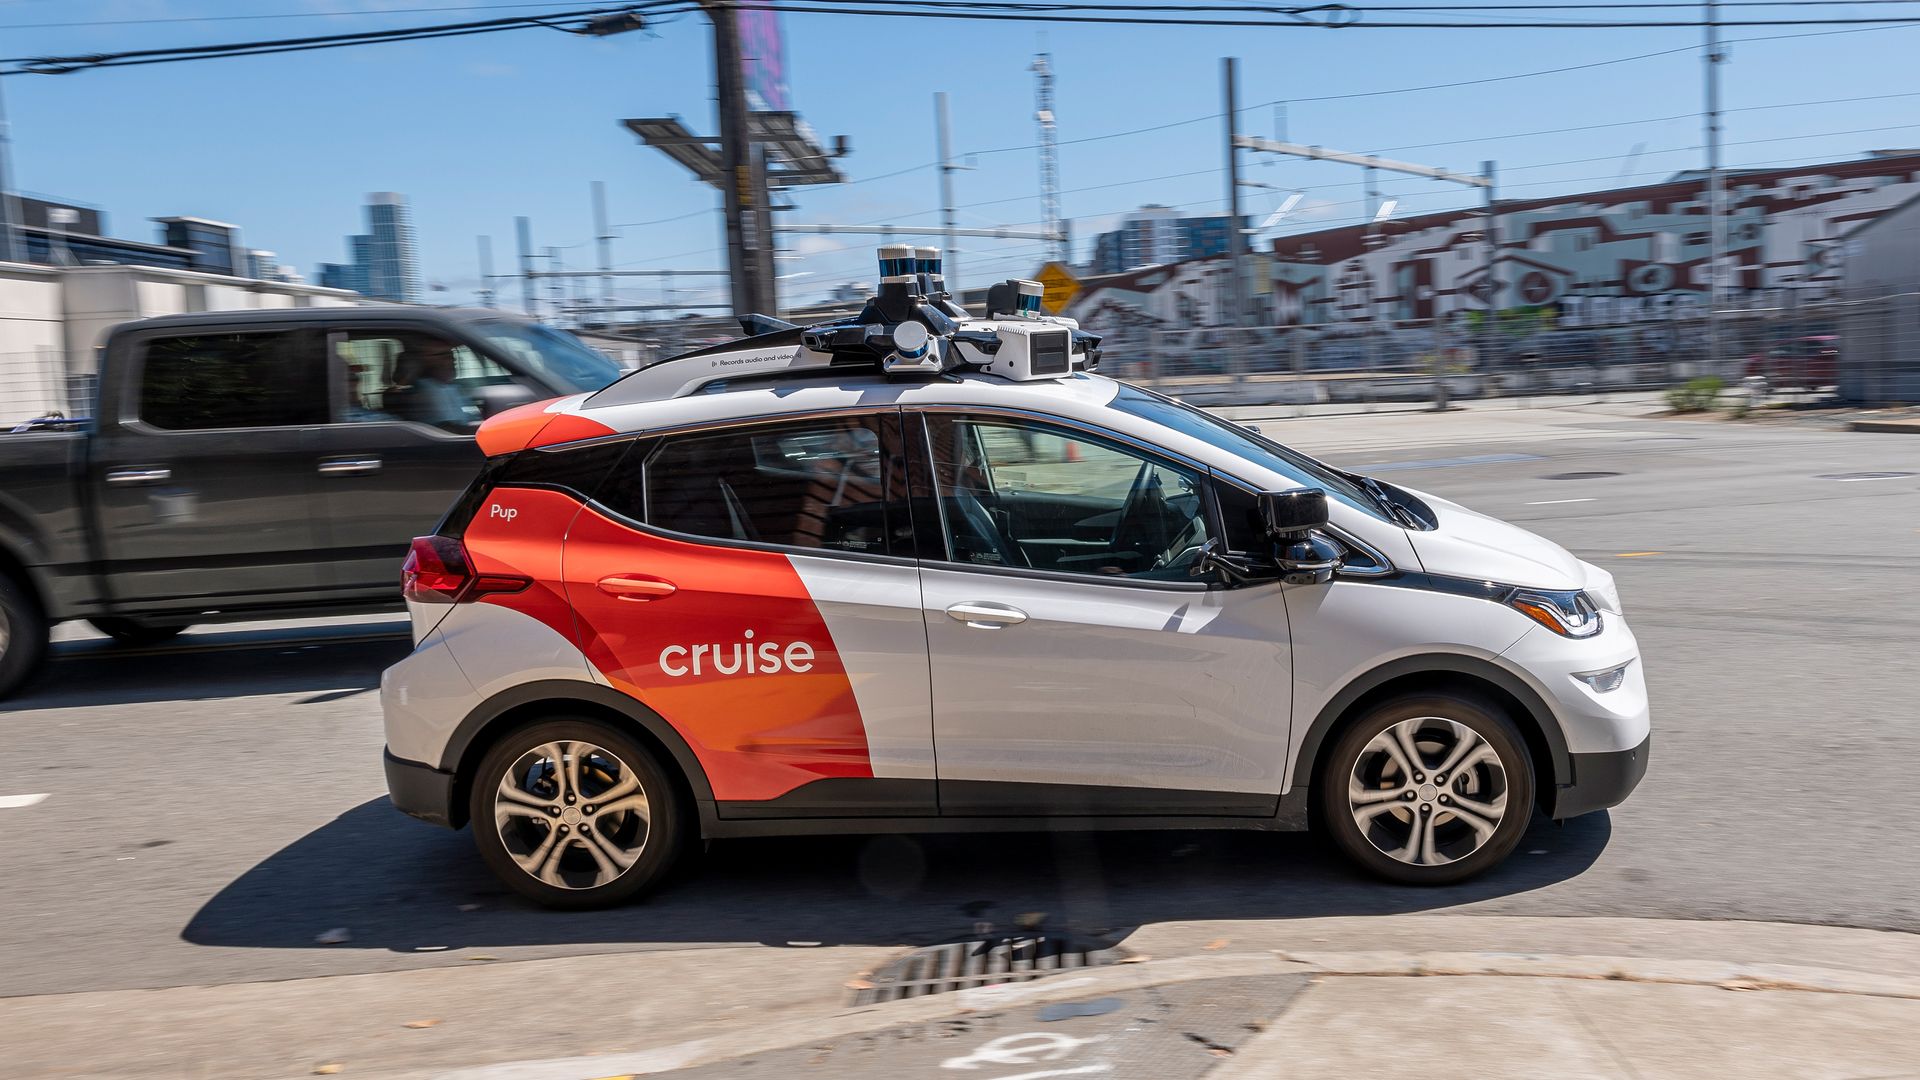 A Cruise autonomous taxi in San Francisco, California, US, on Thursday Aug. 10, 2023. California regulators are poised to decide whether two rival robotaxi services can provide around-the-clock rides throughout San Francisco